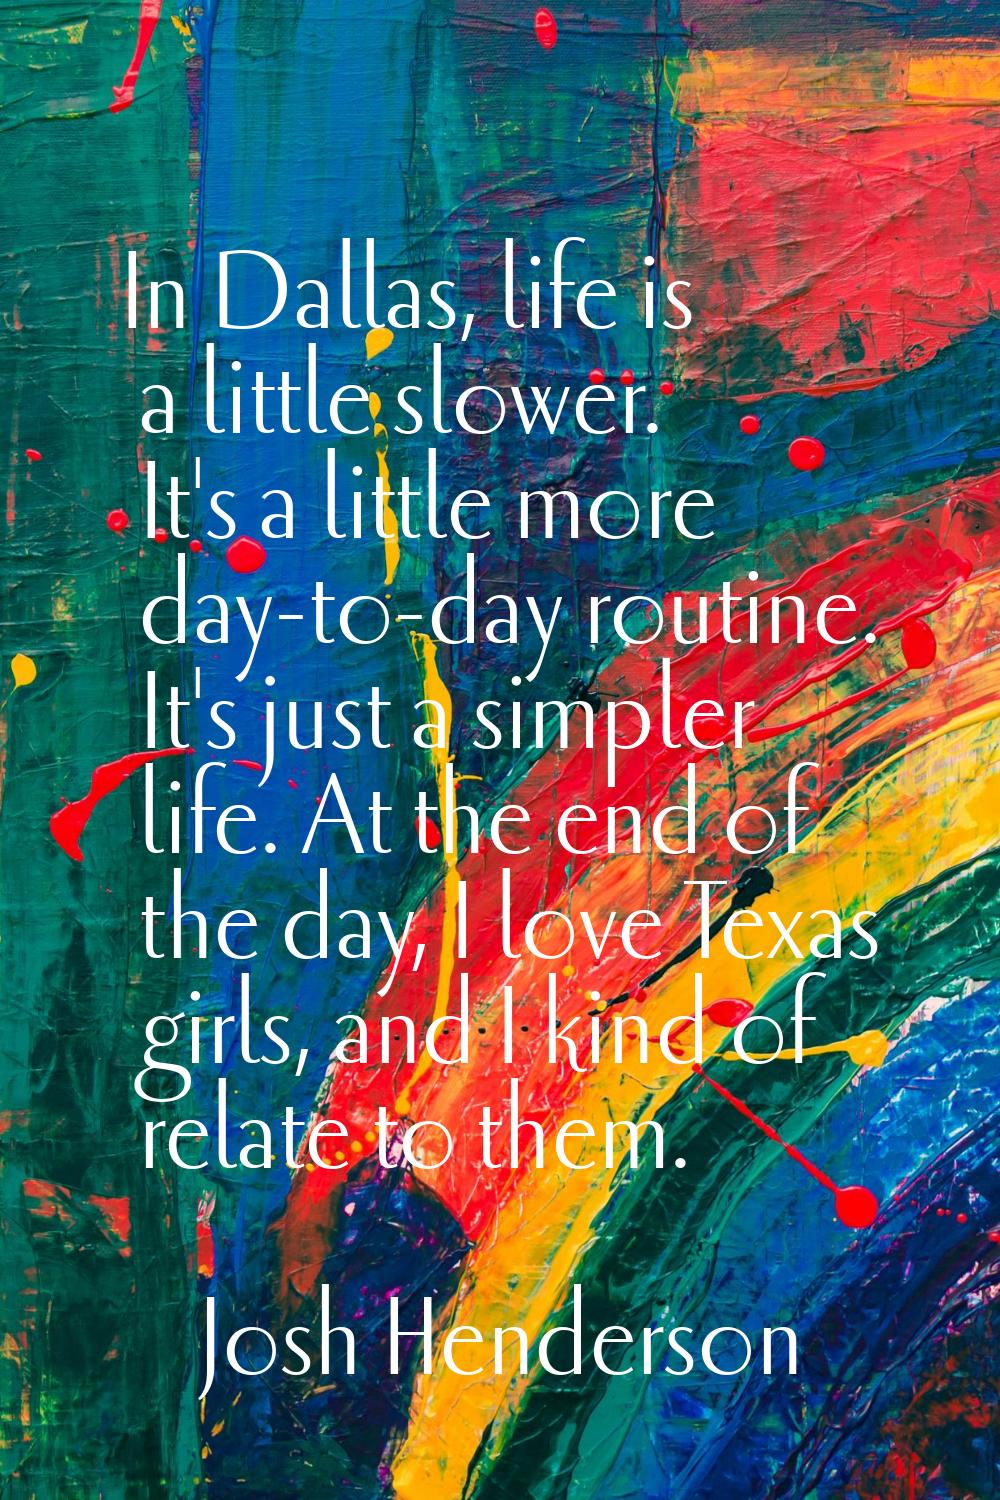 In Dallas, life is a little slower. It's a little more day-to-day routine. It's just a simpler life